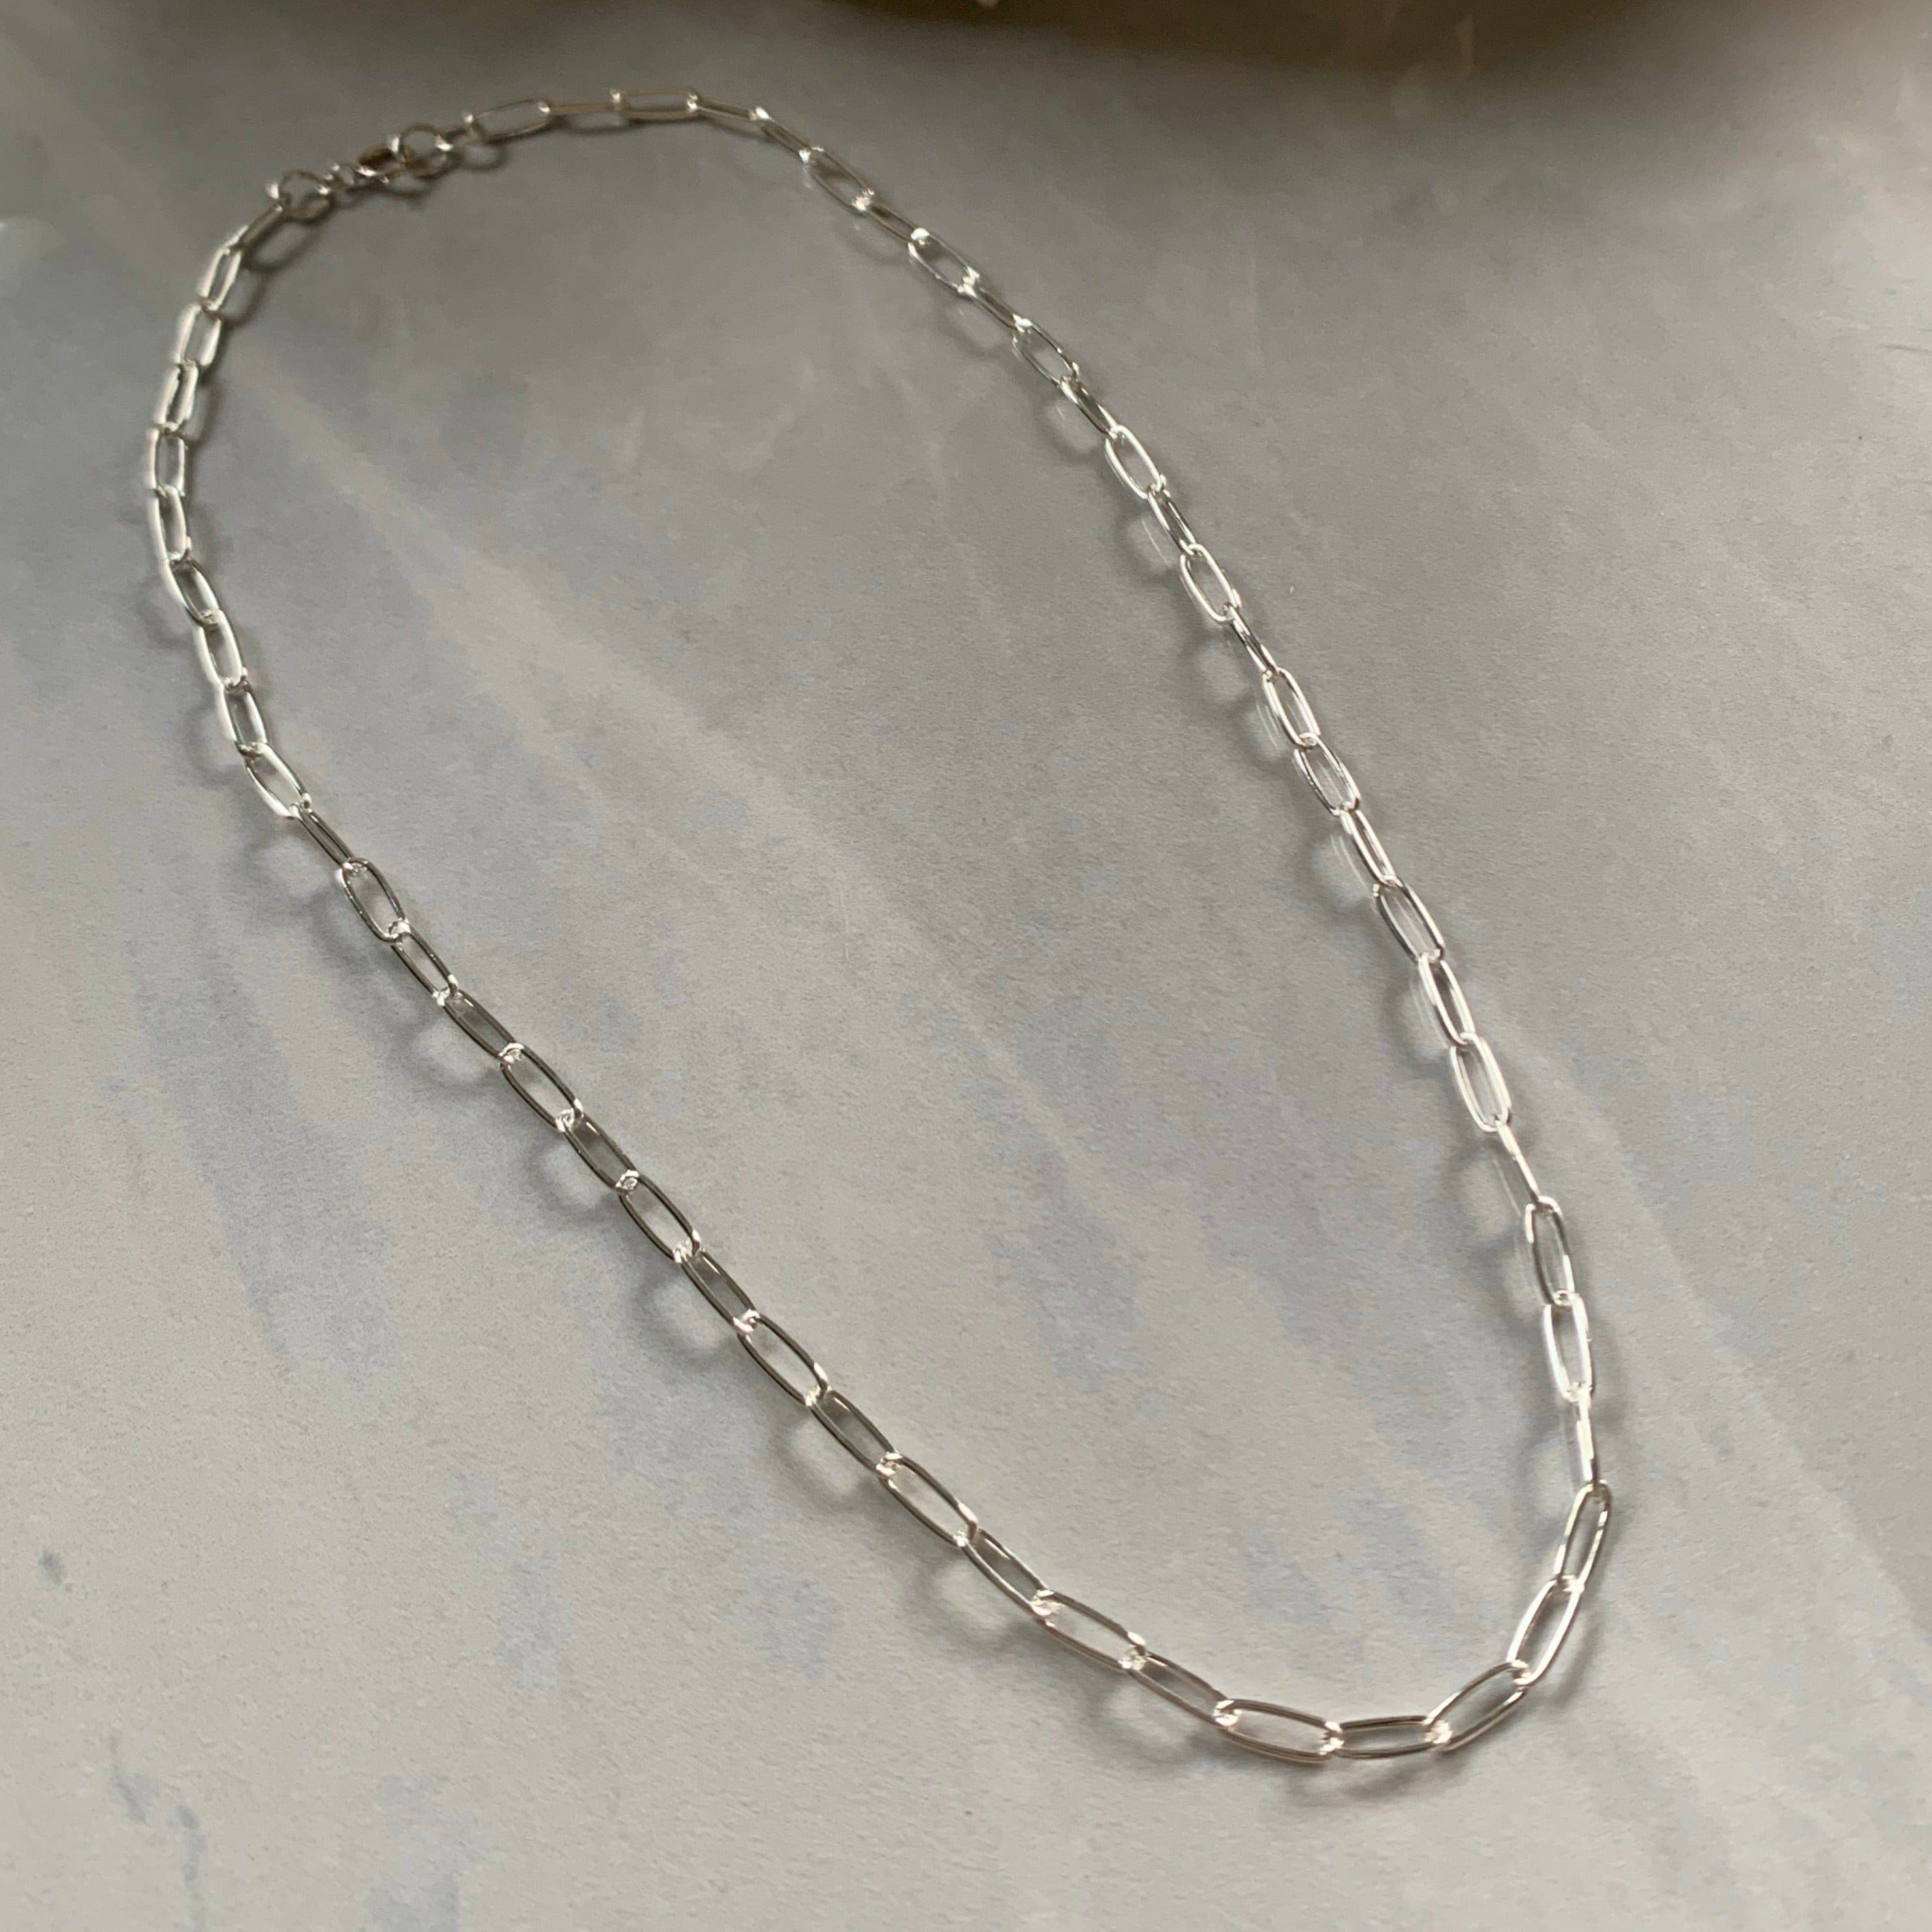 Silver PaperClip Chain Necklace - Jewelers Garden